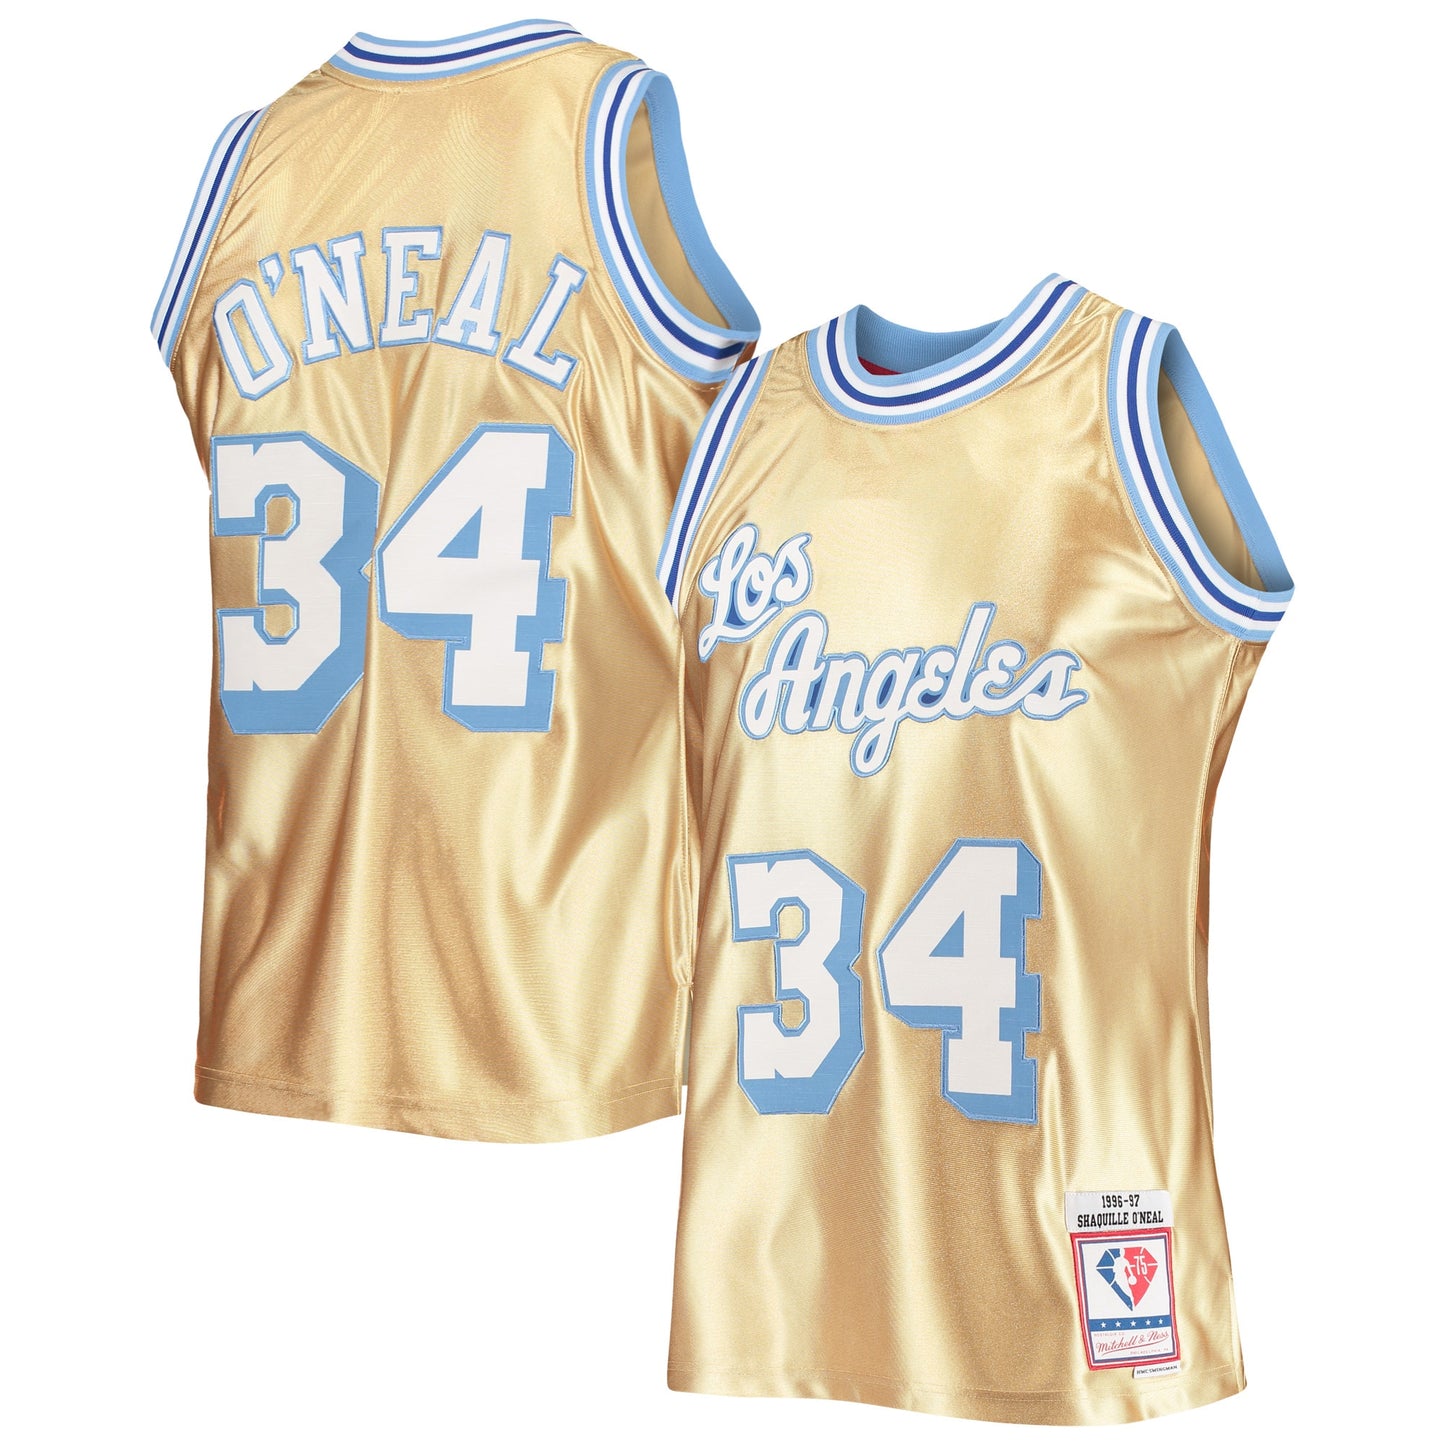 Shaquille O'Neal Los Angeles Lakers Mitchell & Ness 75th Anniversary 1996/97 Hardwood Classics Swingman Jersey - Gold